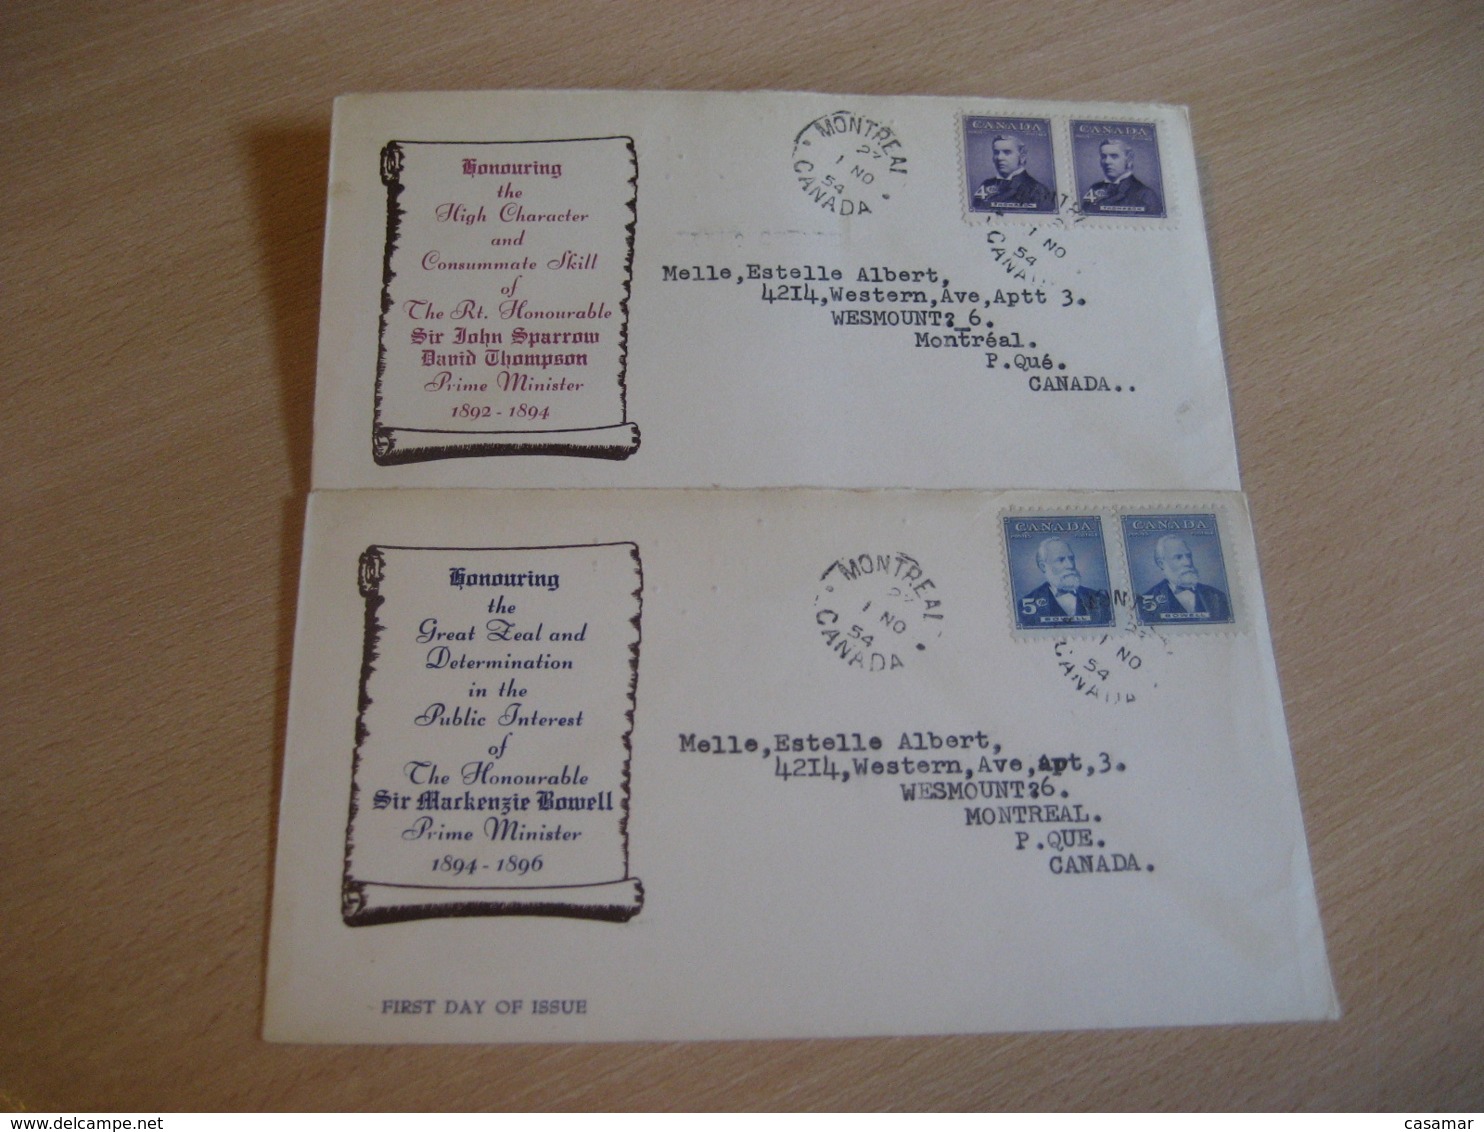 MONTREAL 1954 Yvert 276/7 Bowell Thompson Prime Ministers 2 FDC Cancel Cover CANADA - 1952-1960